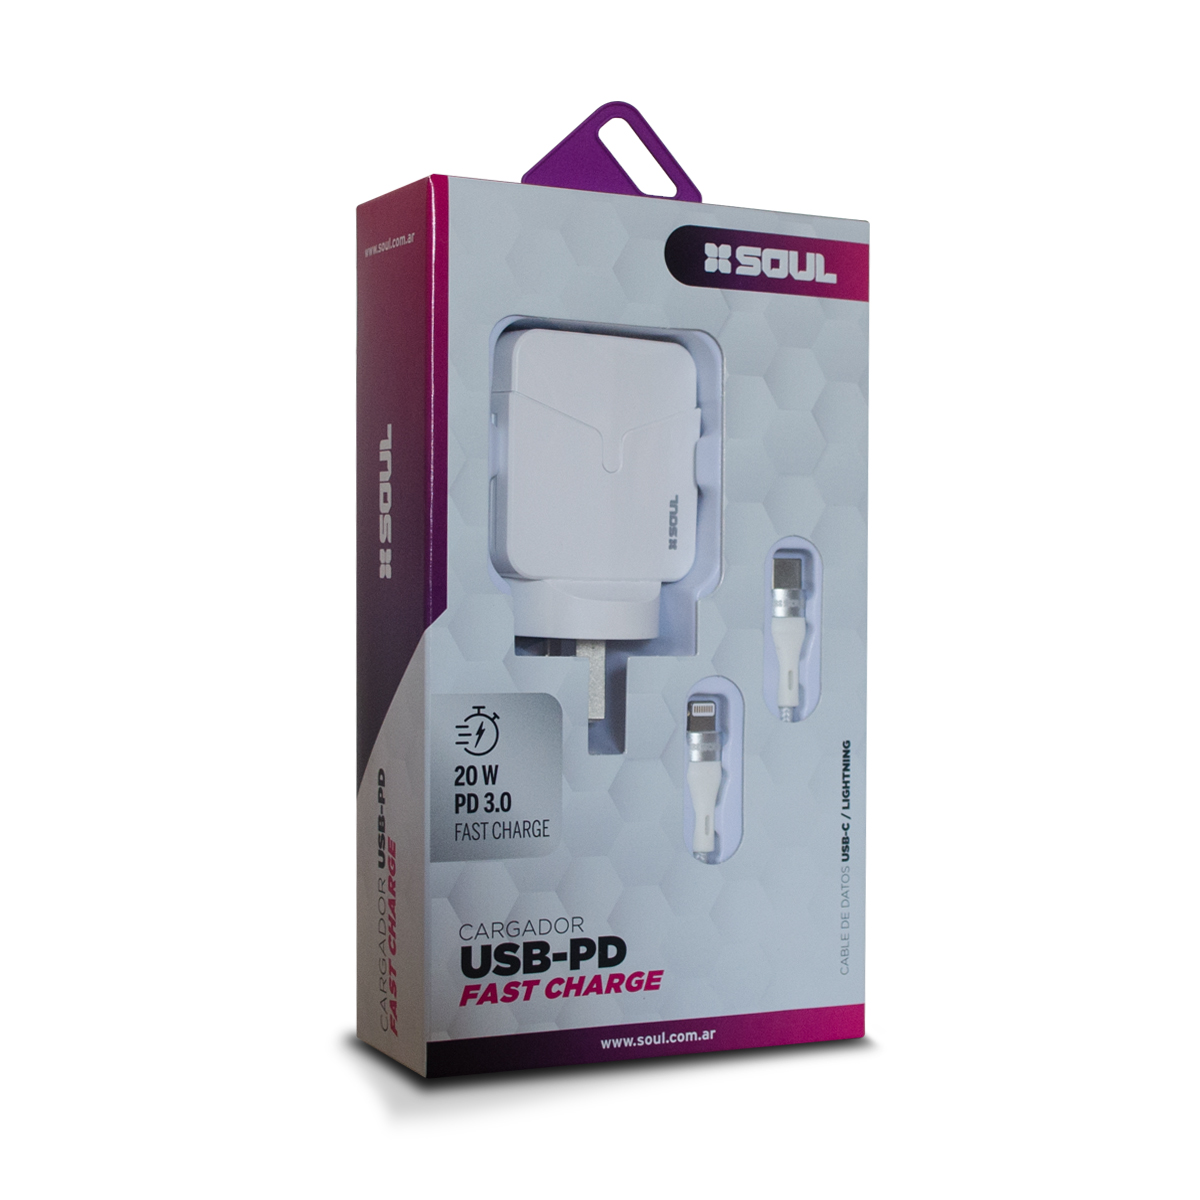 Cargador USB-PD Fast Charge